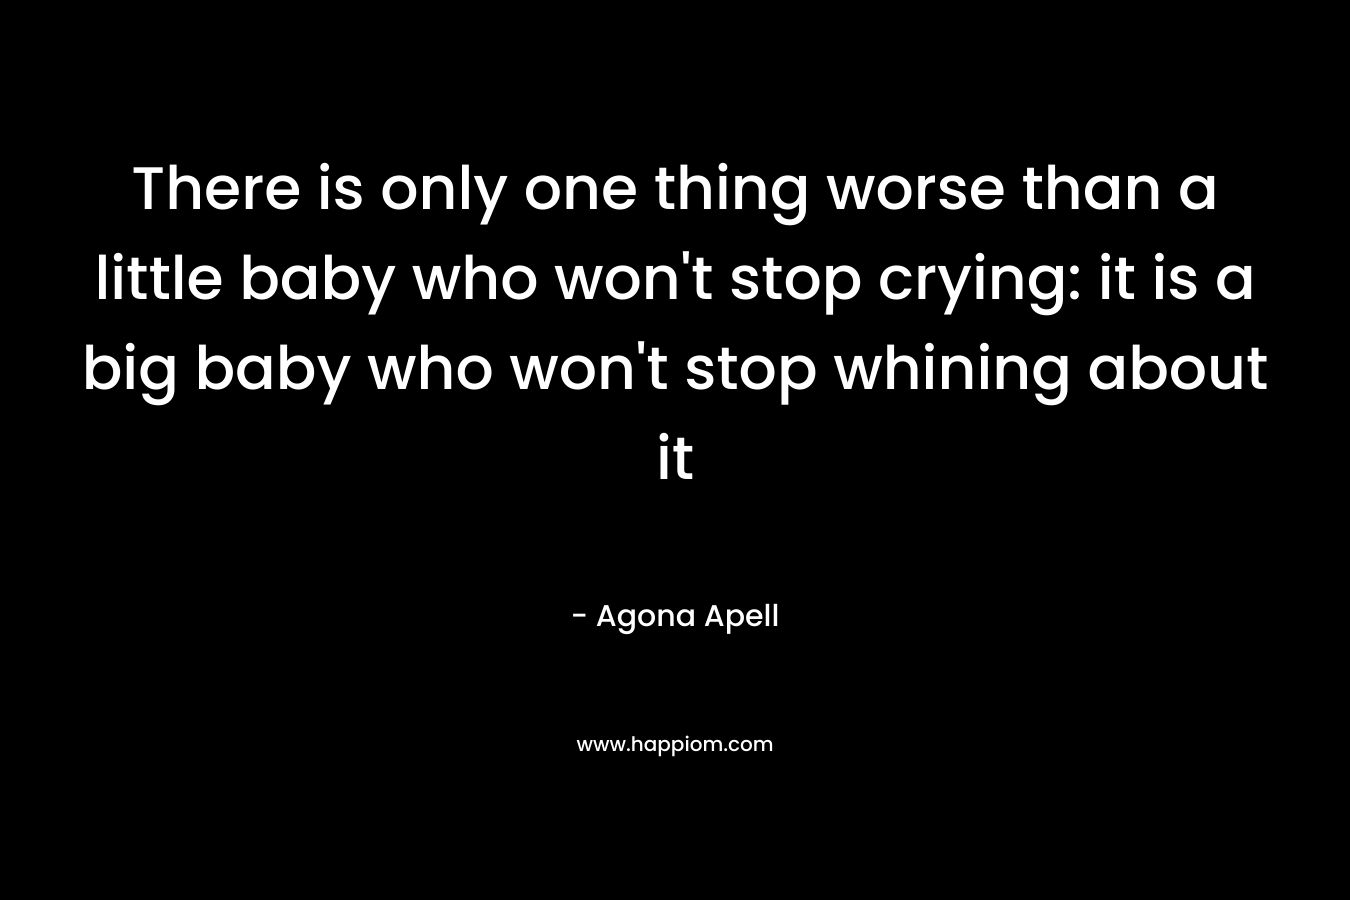 There is only one thing worse than a little baby who won’t stop crying: it is a big baby who won’t stop whining about it – Agona Apell